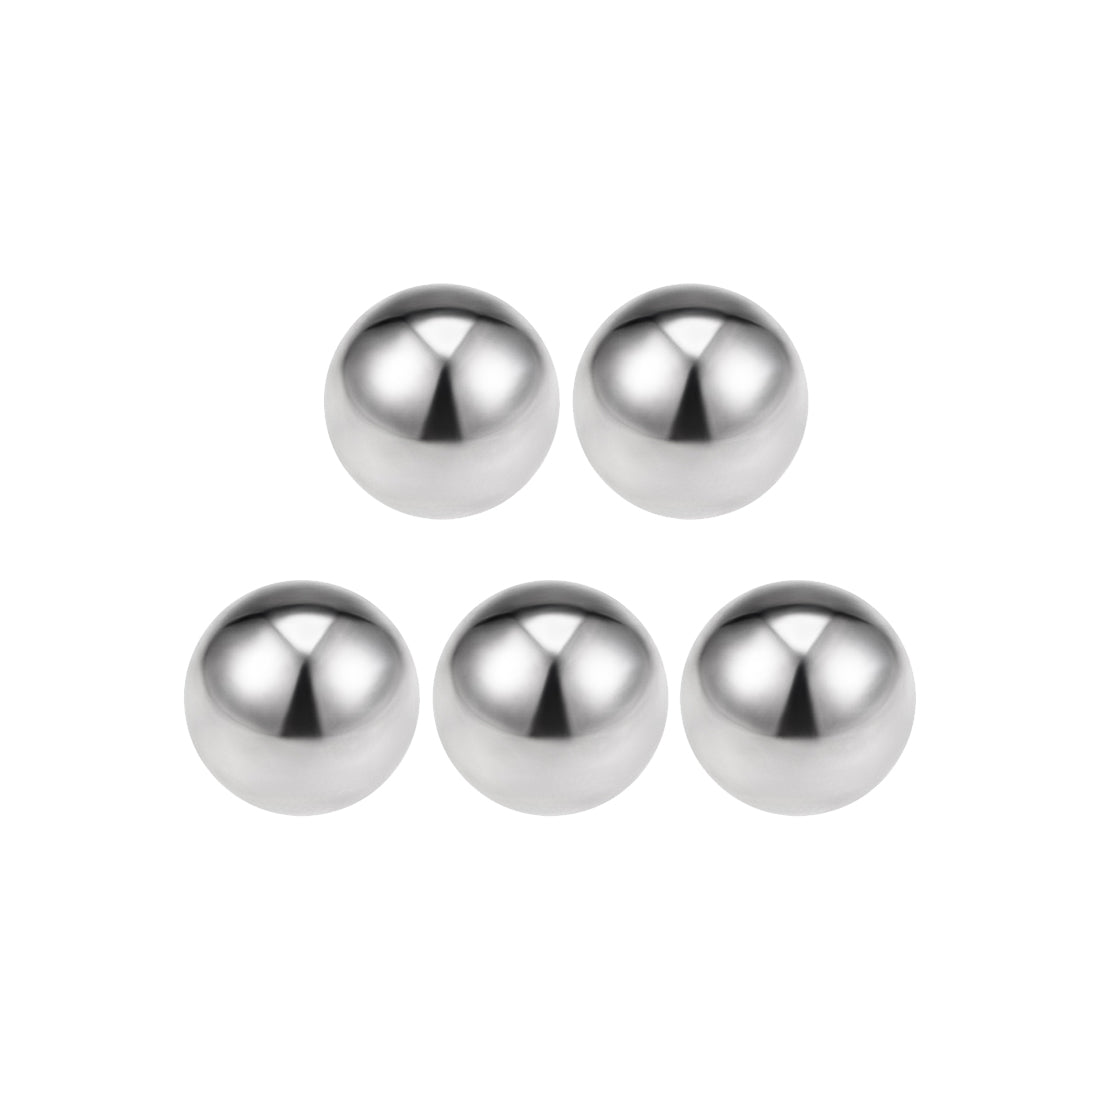 Uxcell Uxcell Bearing Balls 5/8-inch 304 Stainless Steel G100 Precision 5pcs